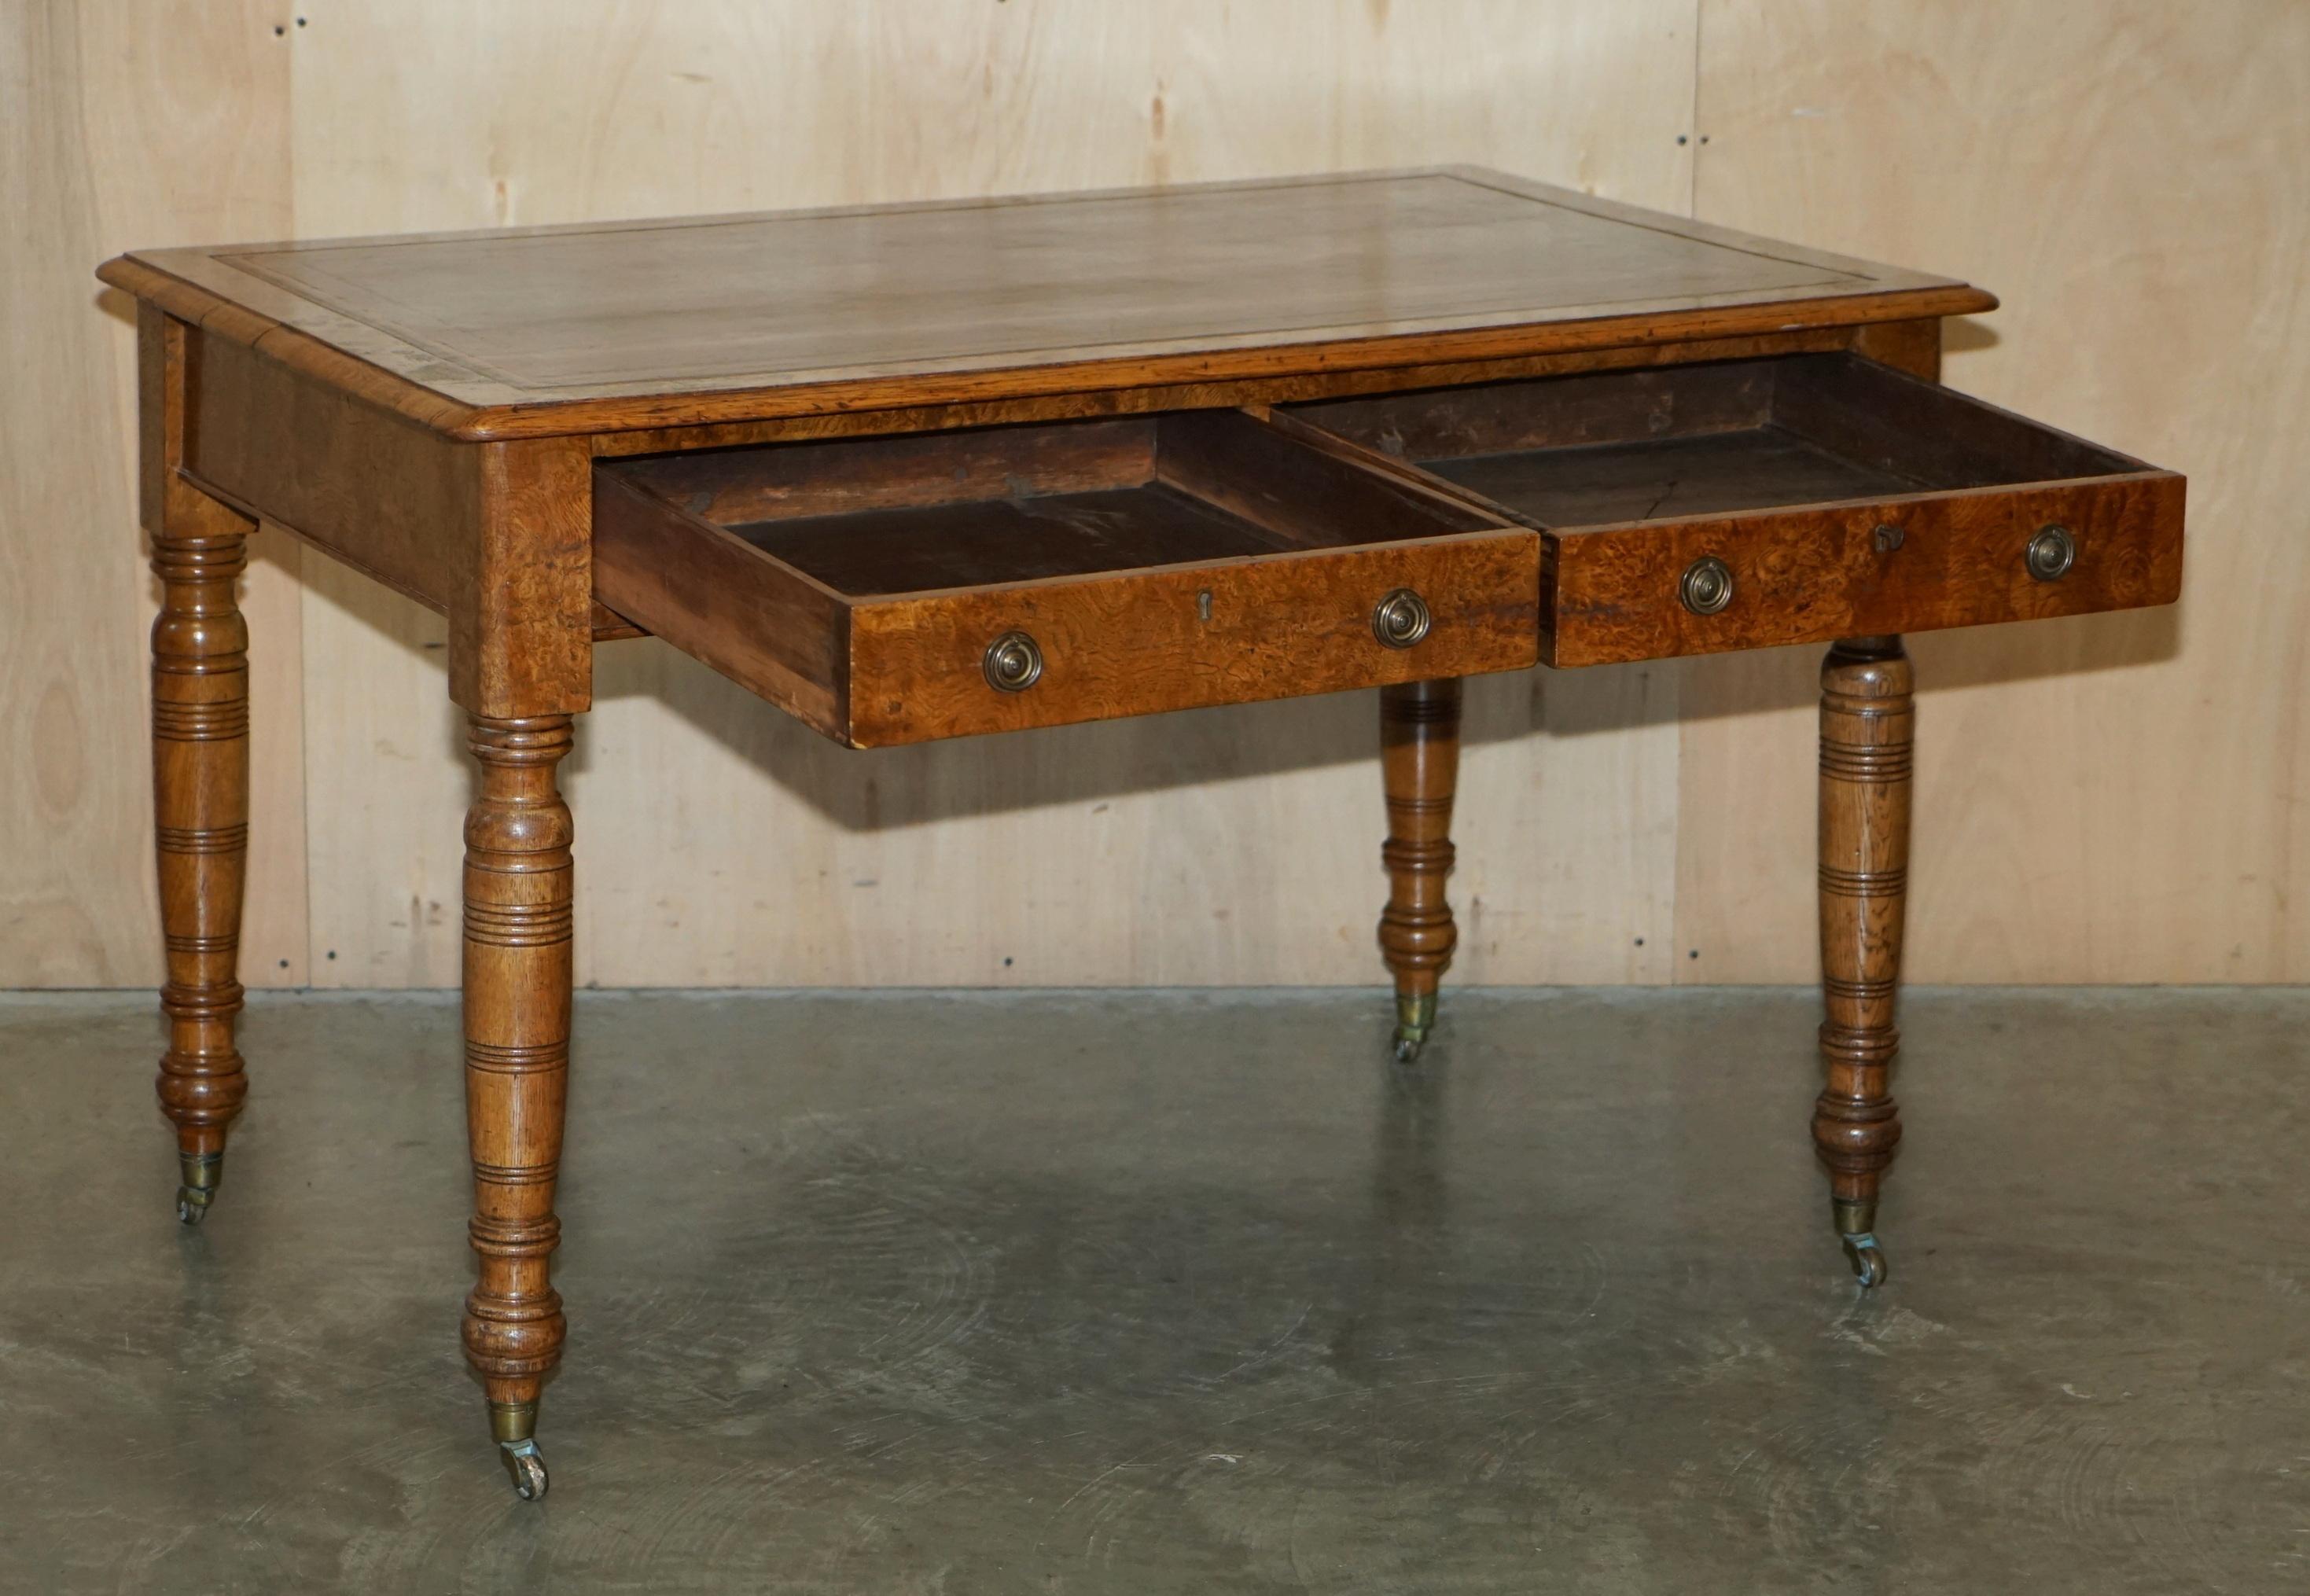 ANTIQUE CIRCA 1840 POLLARD OAK BROWN LEATHER TOP WRiTING LIBRARY TABLE DESK For Sale 13